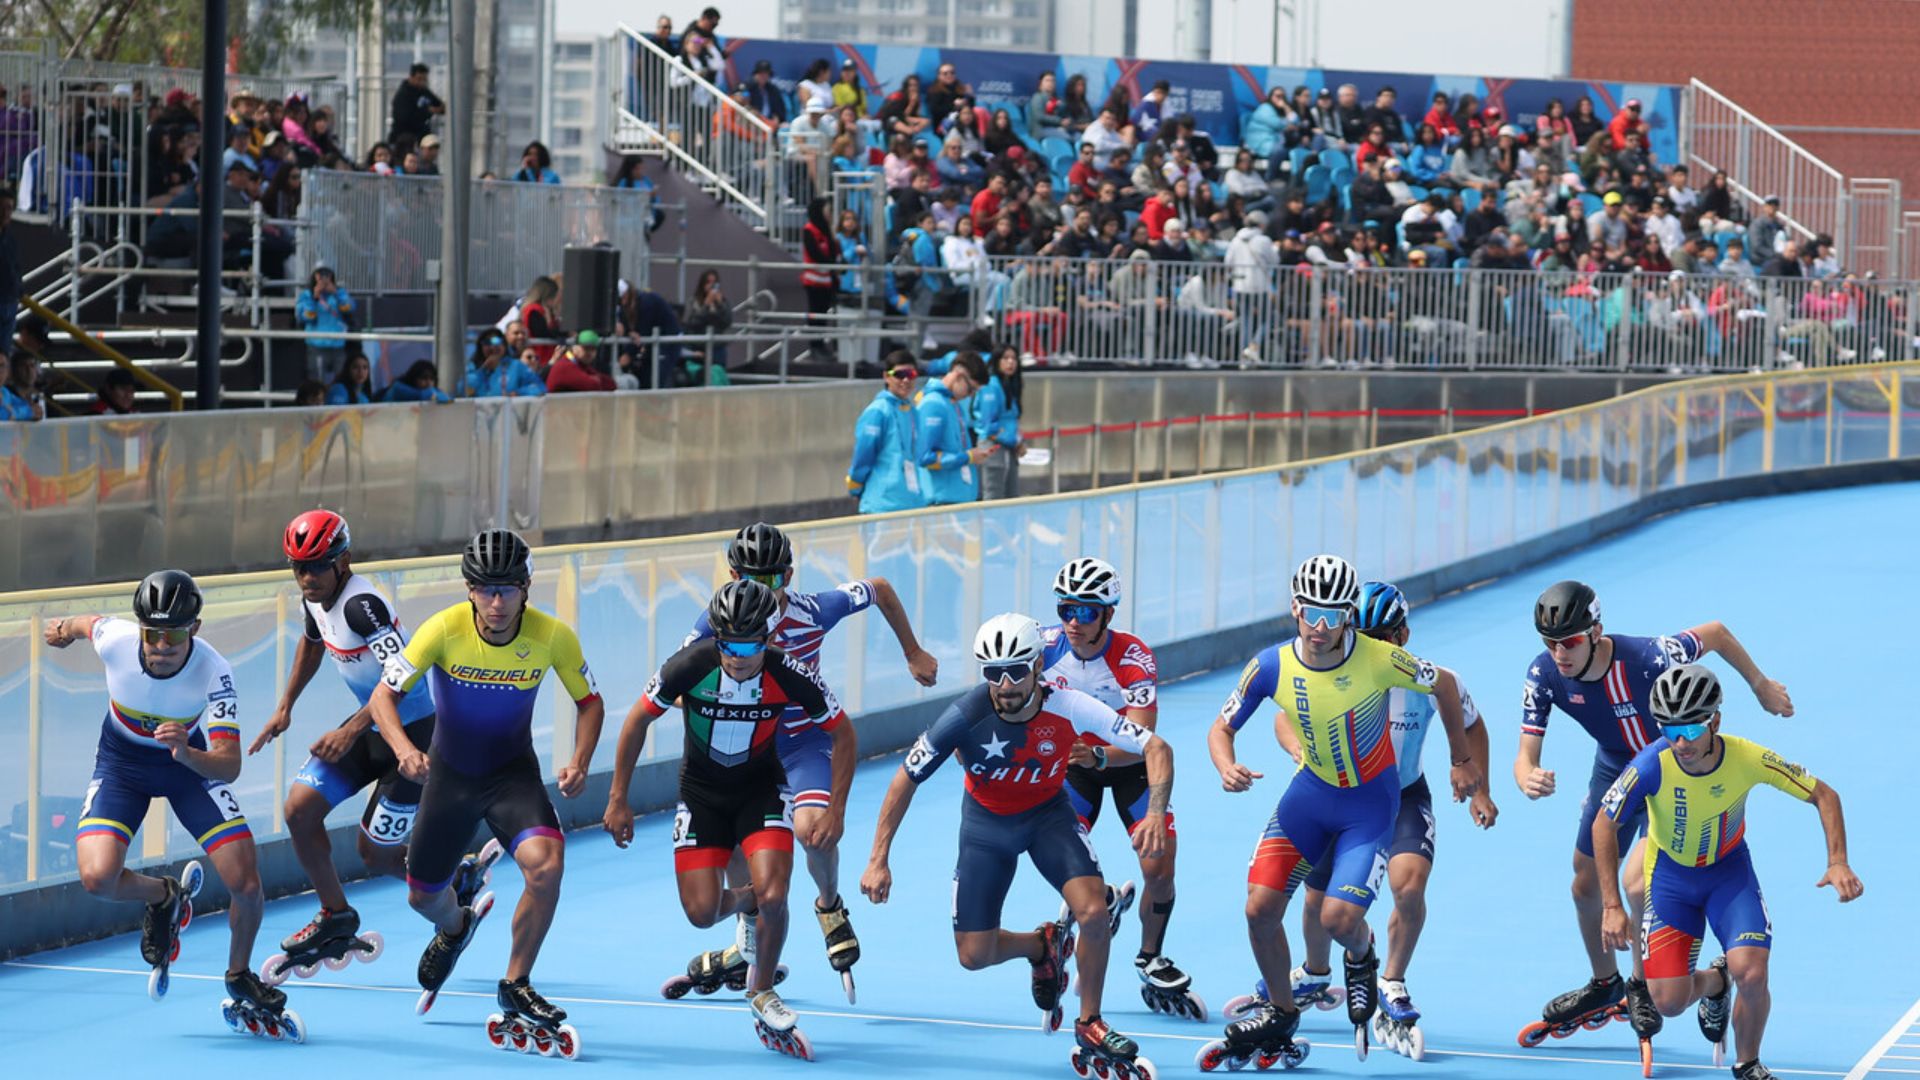 Speed Skating: Colombia Takes the Top Two Spots in Male's 10,000-Meter Race